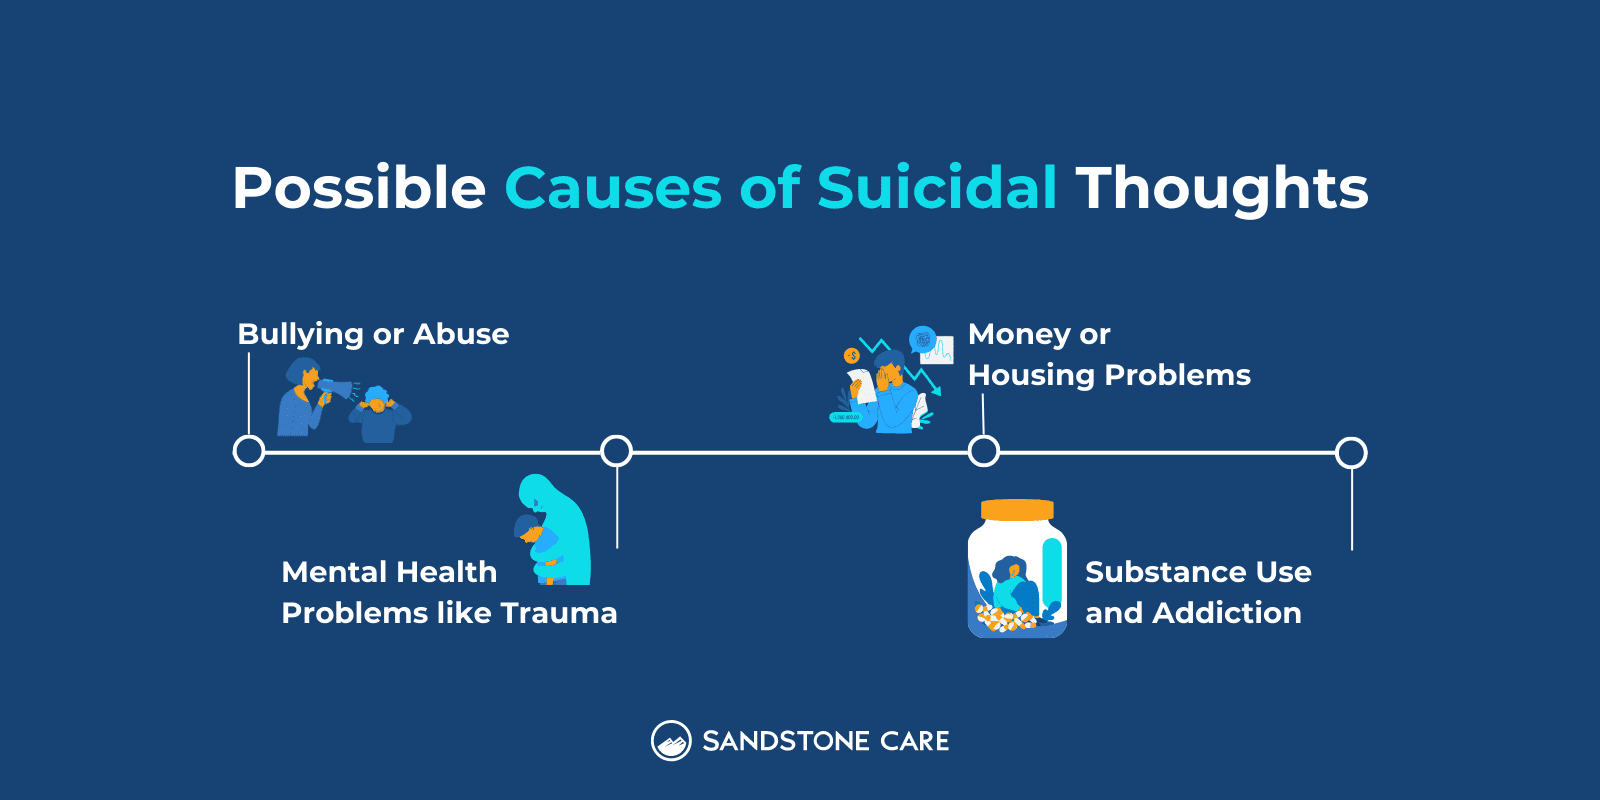 4 Possible causes of suicidal thoughts illustrated with relevant graphics